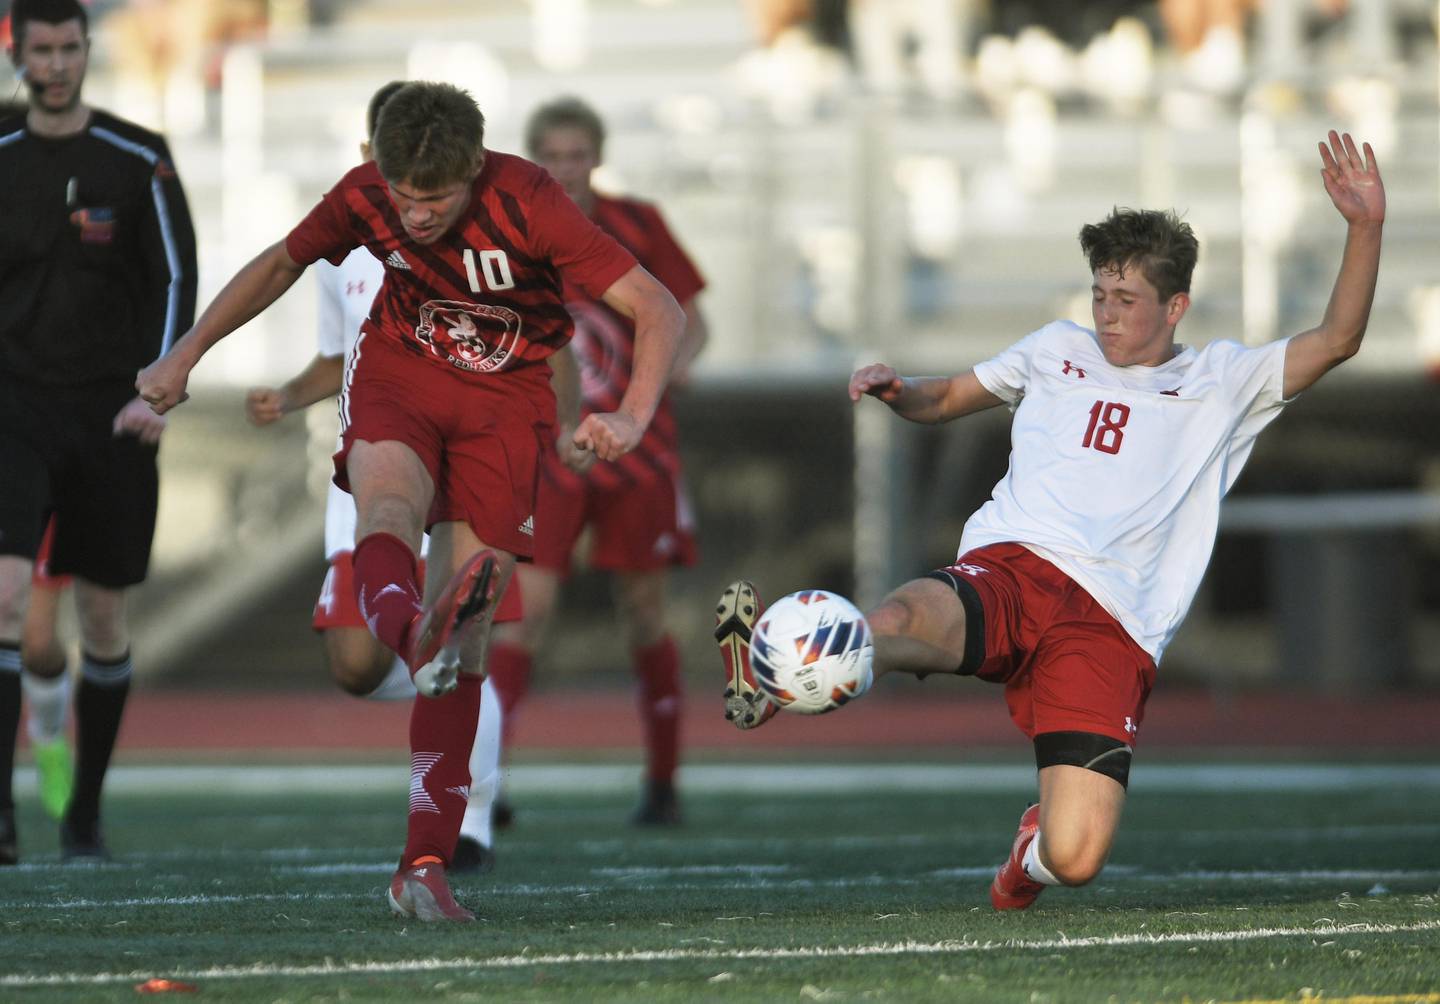 Naperville Central’s Chase Adams takes a shot as Hinsdale Central’s Austen Szurgot tries to stop him in the Class 3A East Aurora supersectional boys soccer game on Tuesday, November 1, 2022.